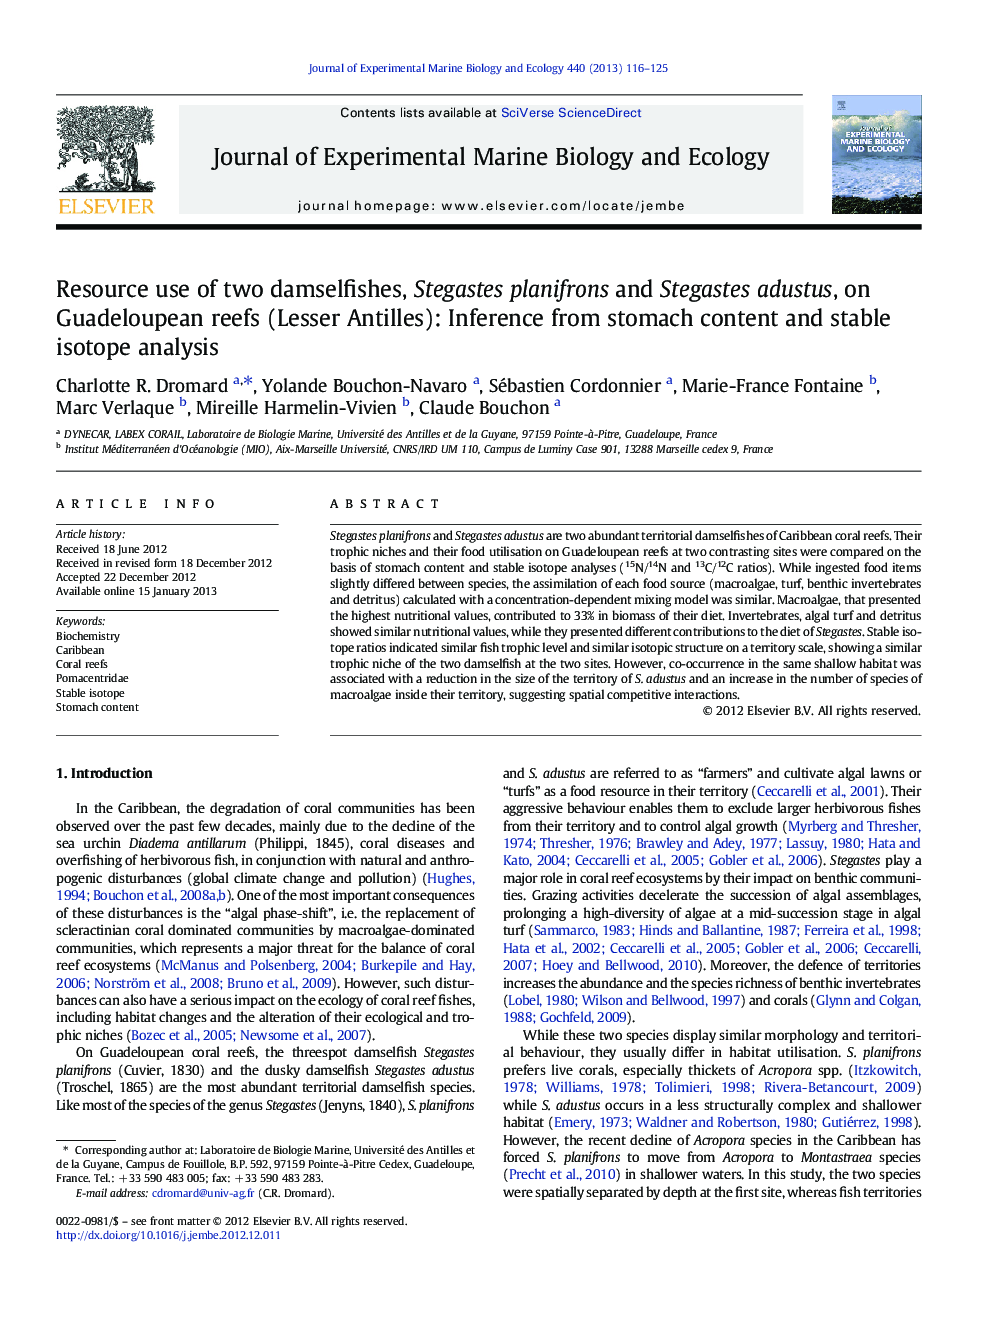 Resource use of two damselfishes, Stegastes planifrons and Stegastes adustus, on Guadeloupean reefs (Lesser Antilles): Inference from stomach content and stable isotope analysis